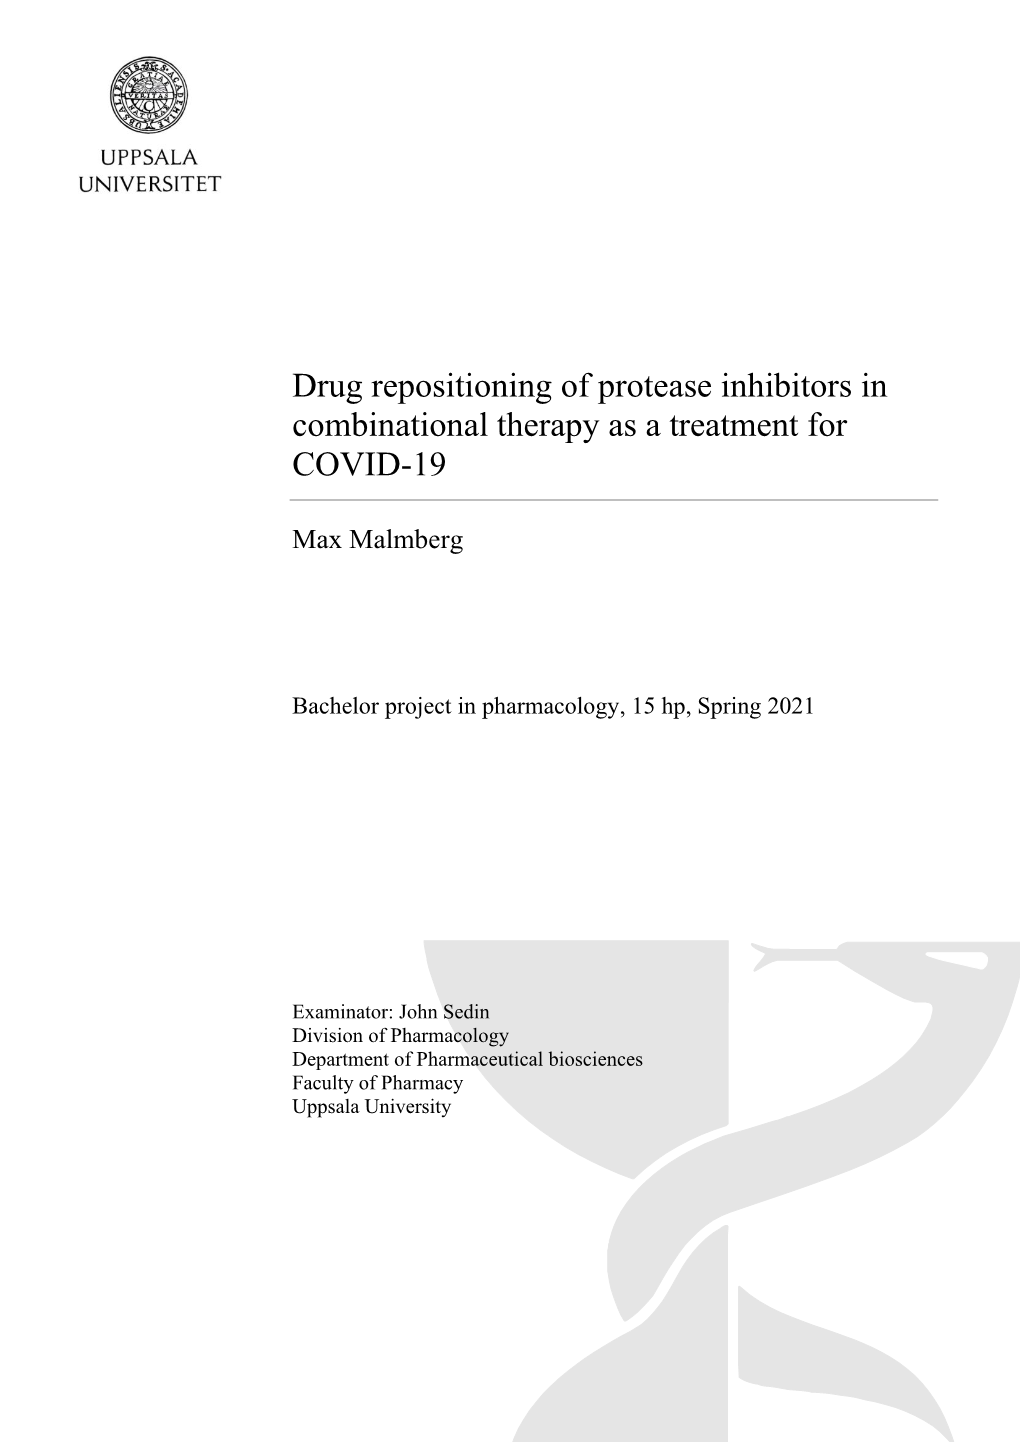 Drug Repositioning of Protease Inhibitors in Combinational Therapy As a Treatment for COVID-19